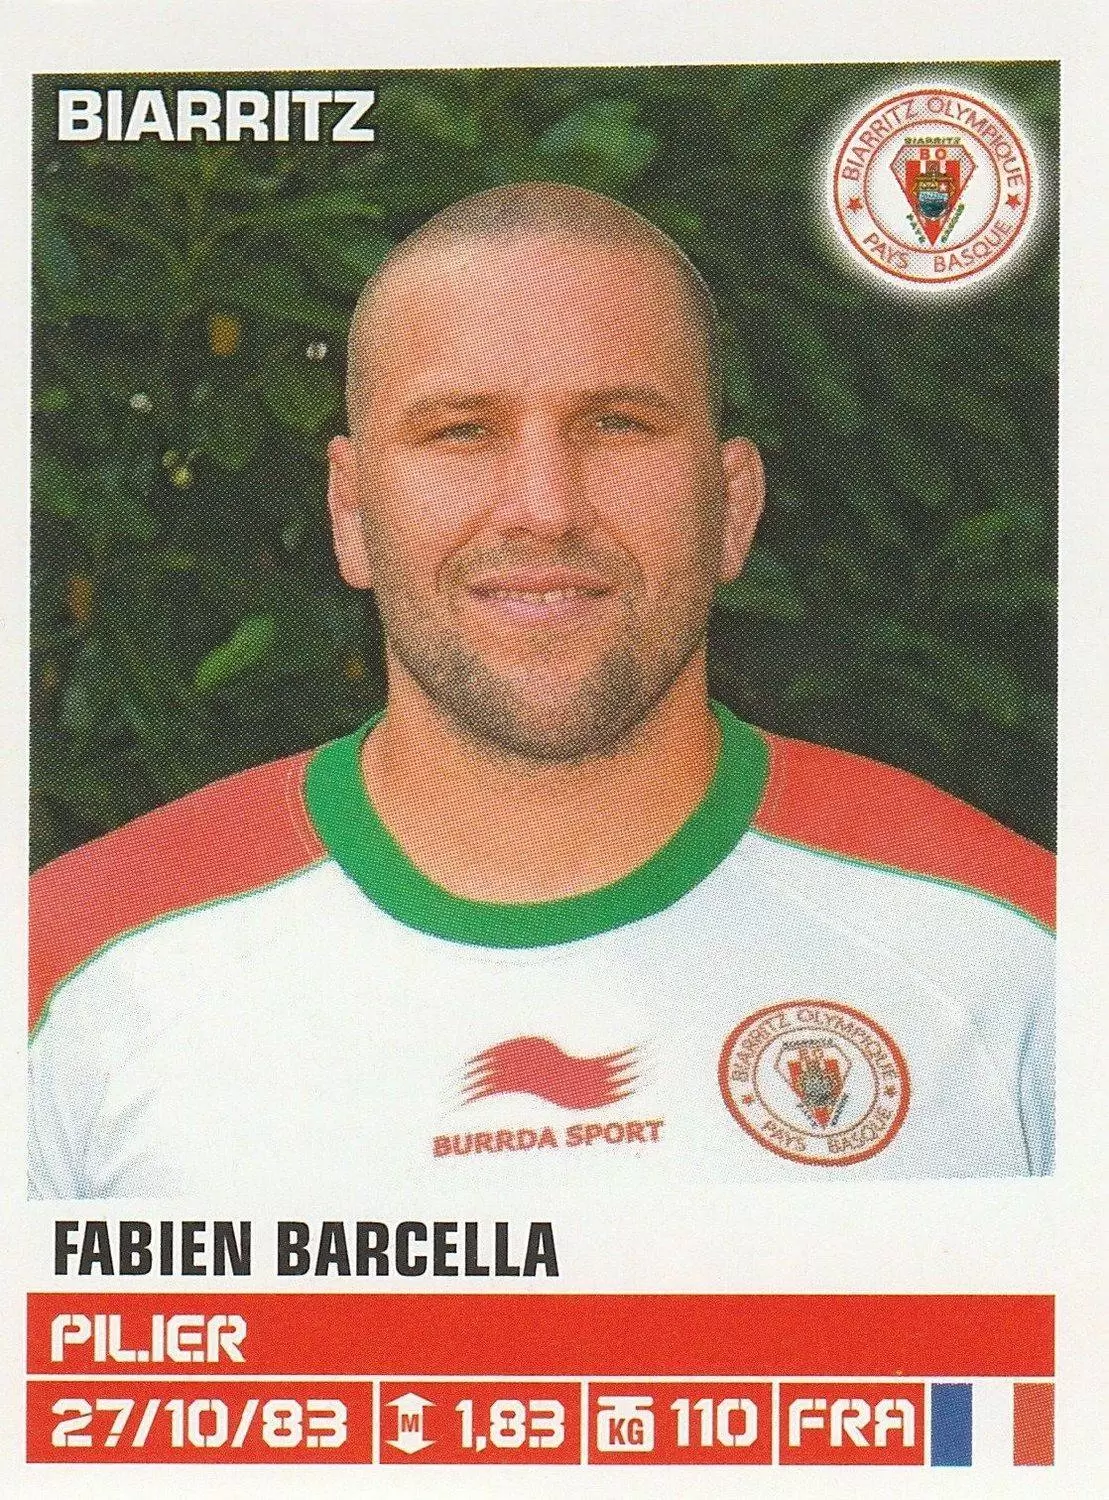 Rugby 2013 - 2014 - Fabien Barcella - Biarritz Olympique Pays Basque